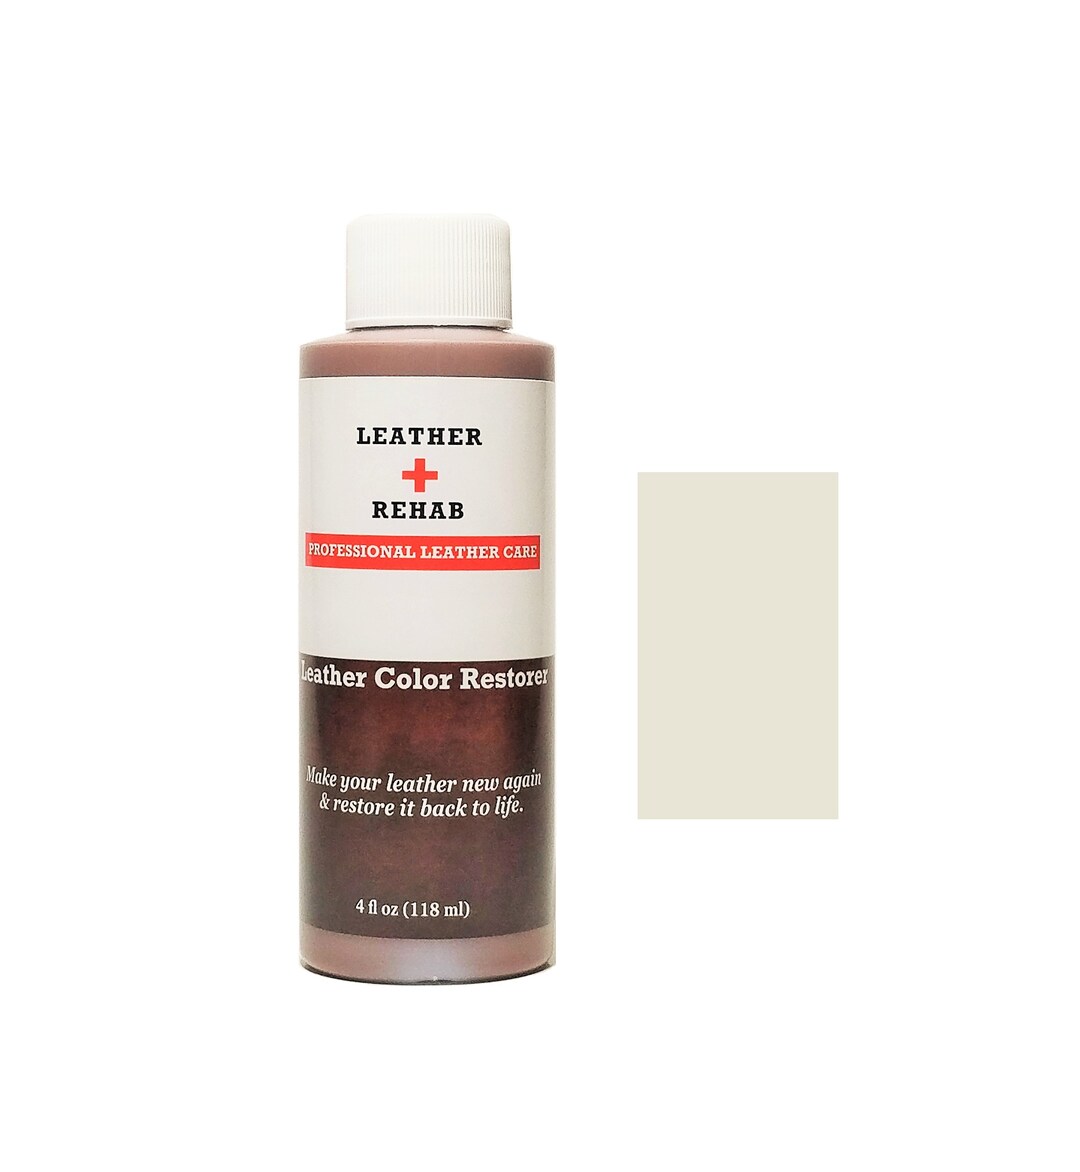 7-Color Leather Recoloring Balm Repair,Touch up,Restore Color